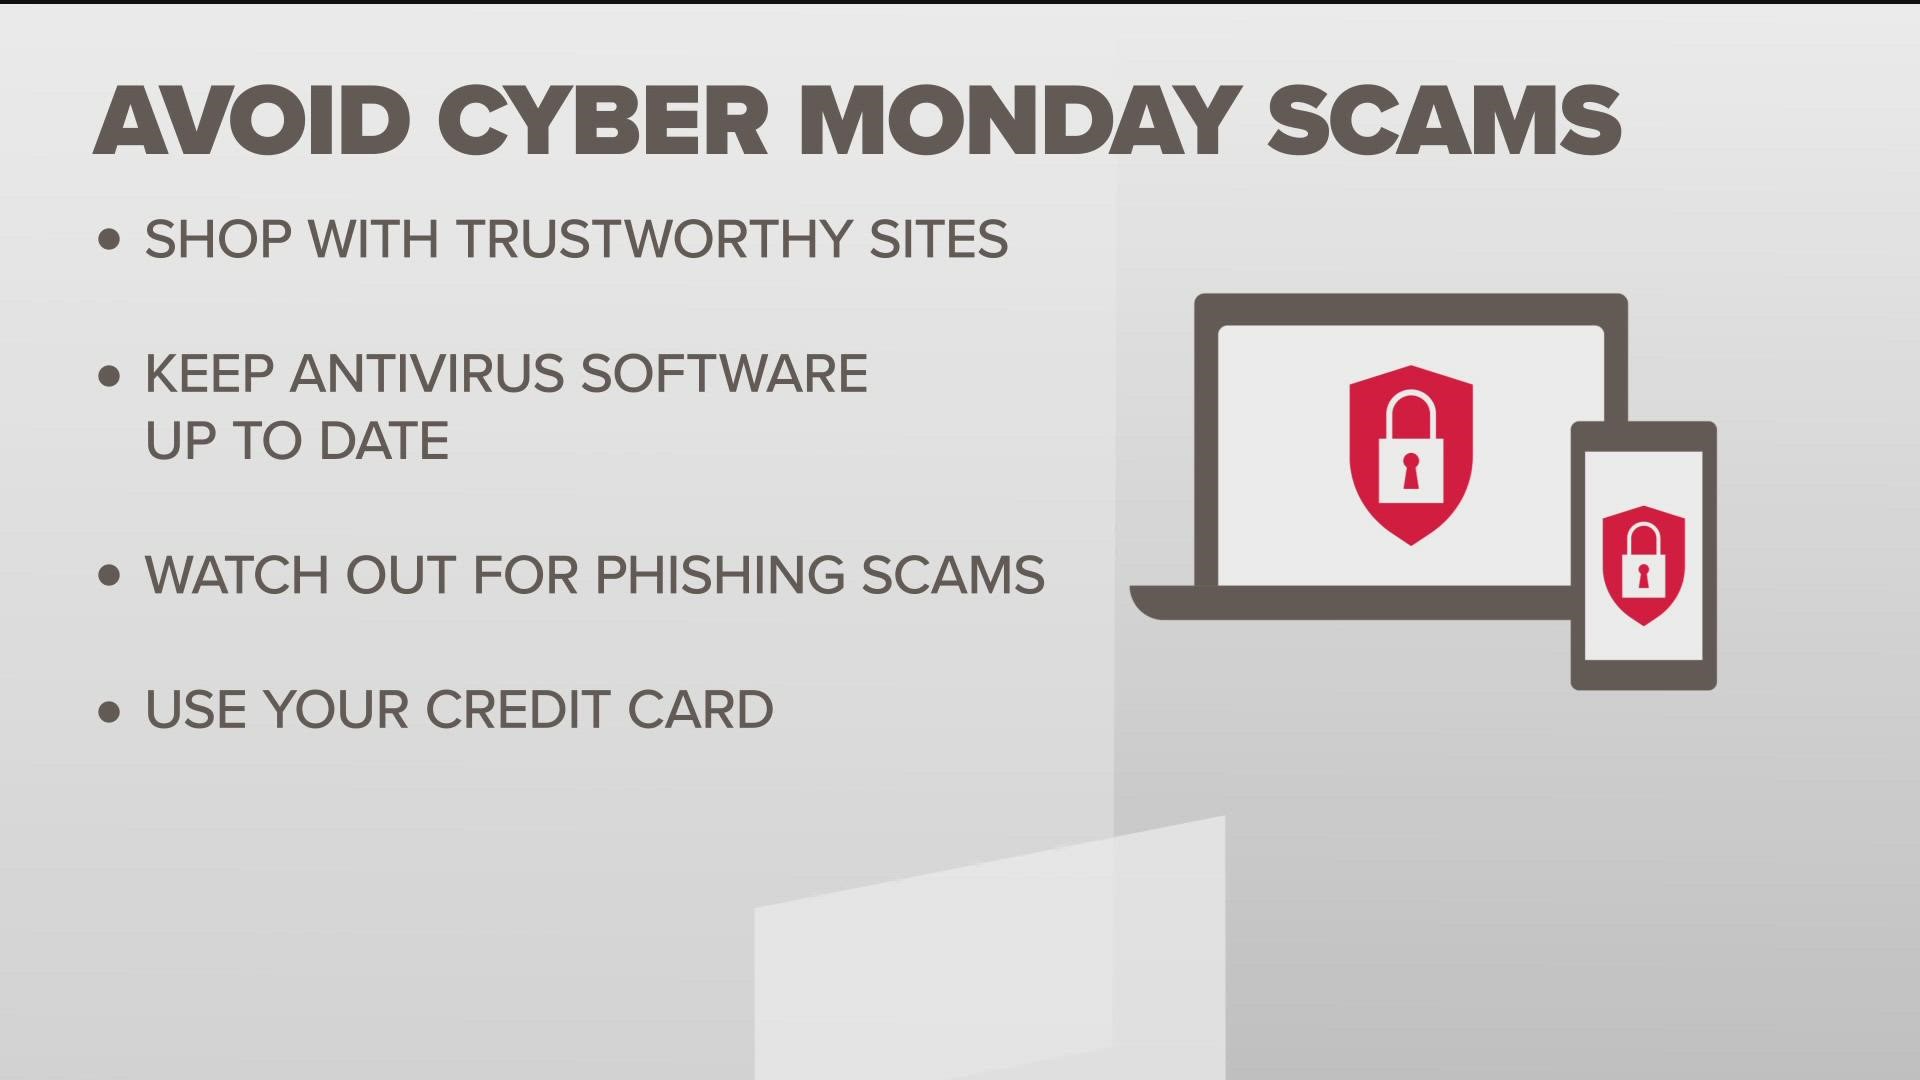 Cyber Monday is here! Practice these tips when shopping online to keep yourself protected and your wallet happy.